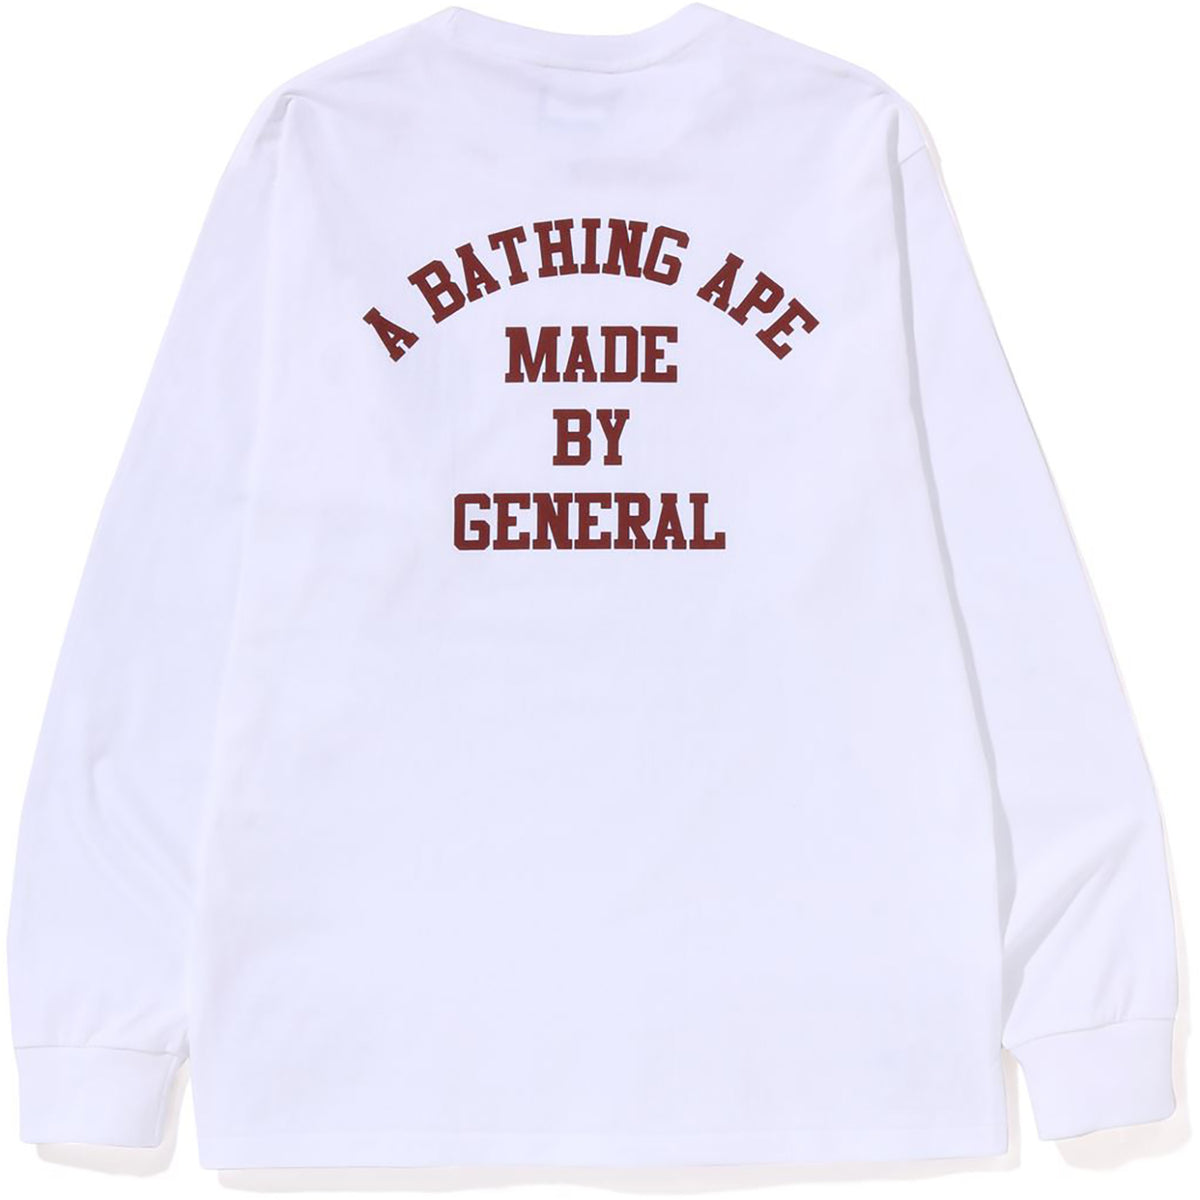 A BATHING APE LETTERED L/S TEE MENS